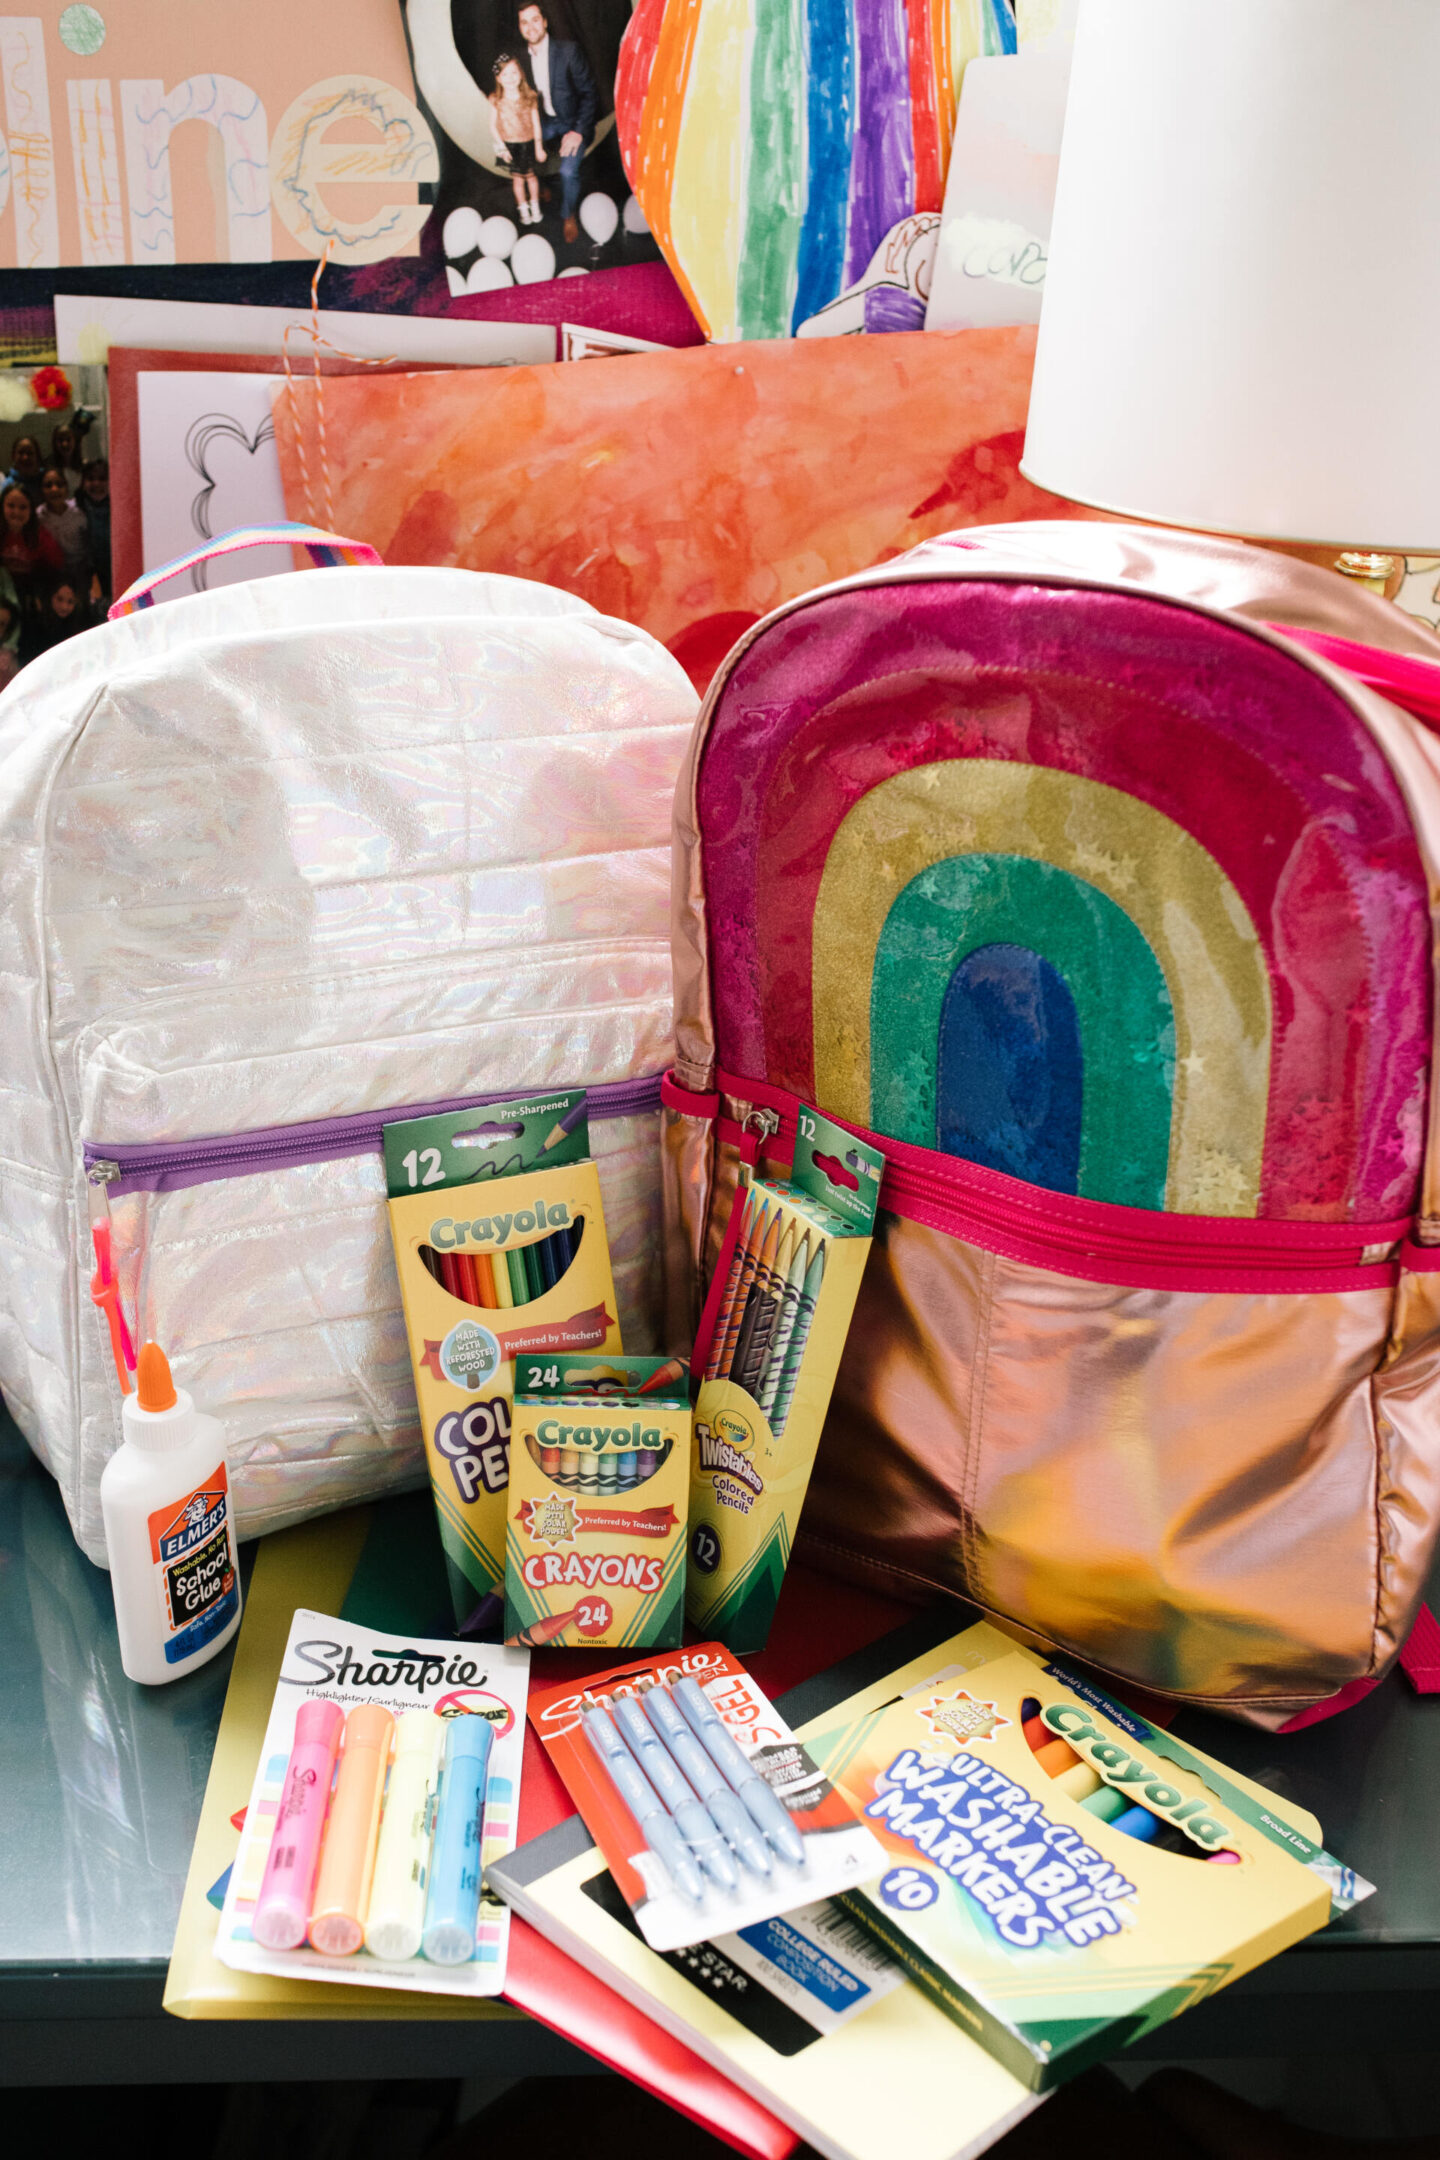 Back to School Essentials by popular Nashville lifestyle blog, Hello Happiness: image of a white iridescent backpack, rainbow backpack, crayon colored pencils, crayola crayons, sharpie highlighters, sharpie pens, craylola markers, Elmer's glue, and notebooks. 